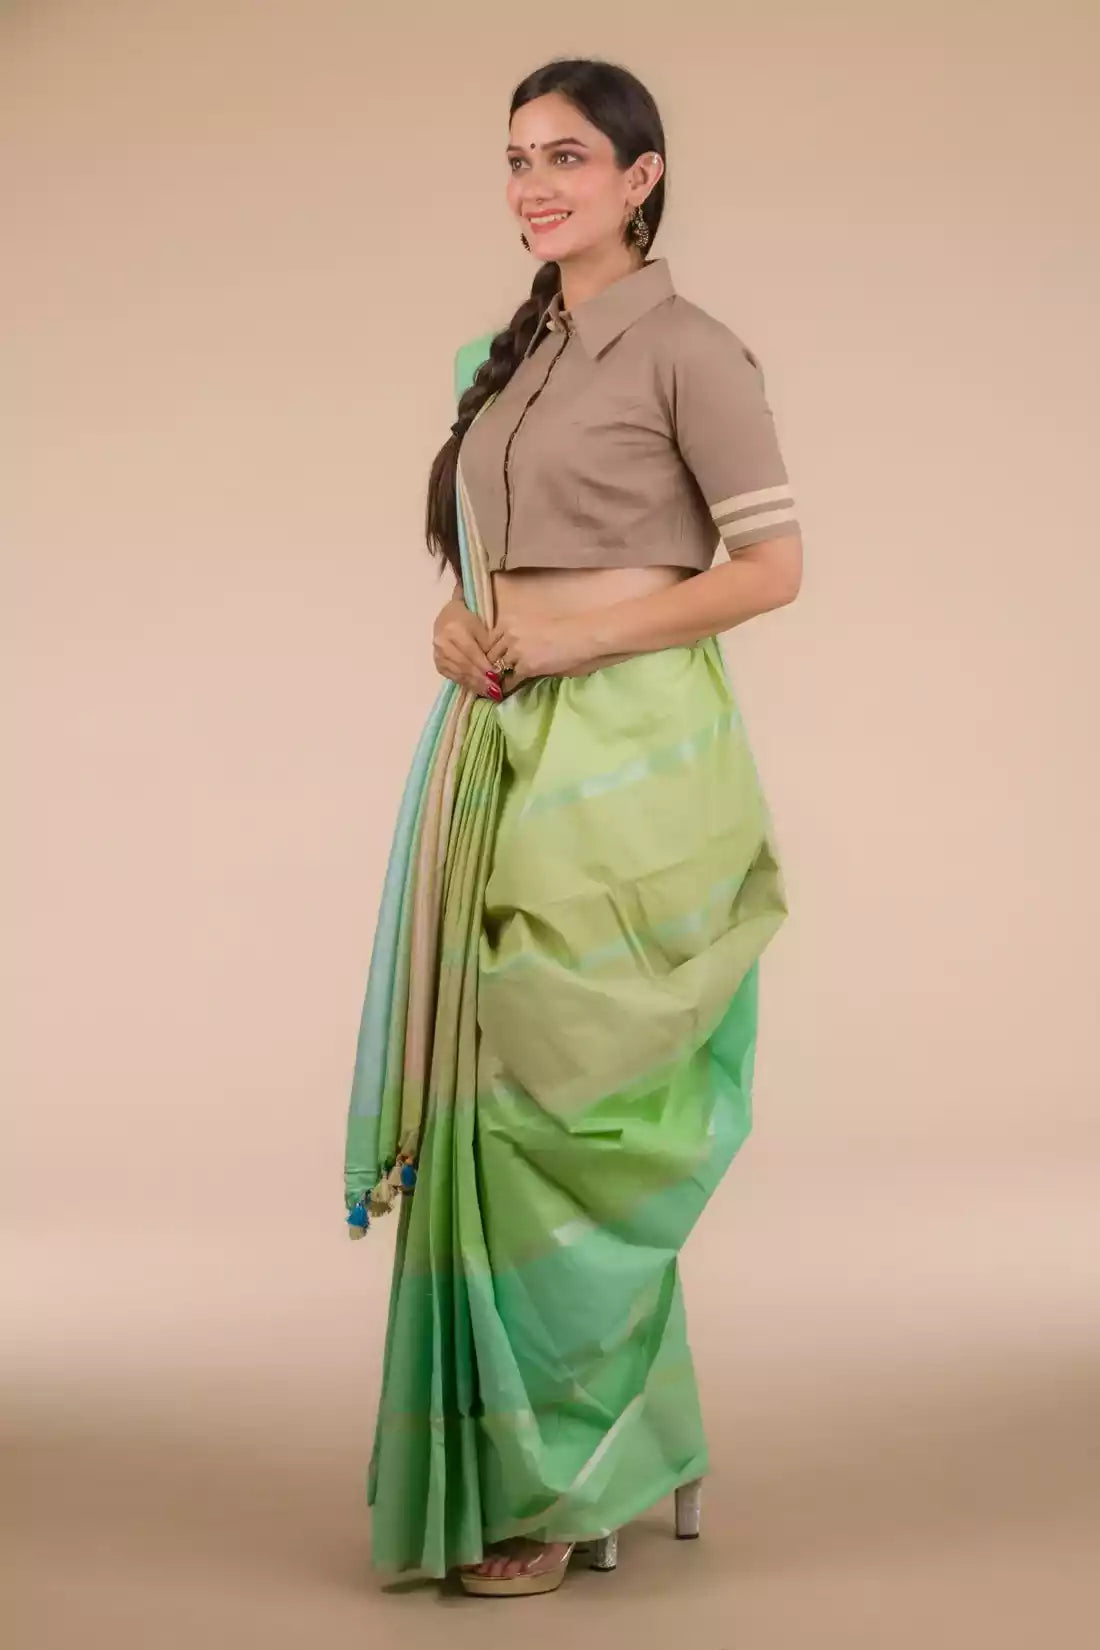 A lady in Horizontal stripes Multicolor In Pure Cotton Saree, womens workwear standing against a beige background